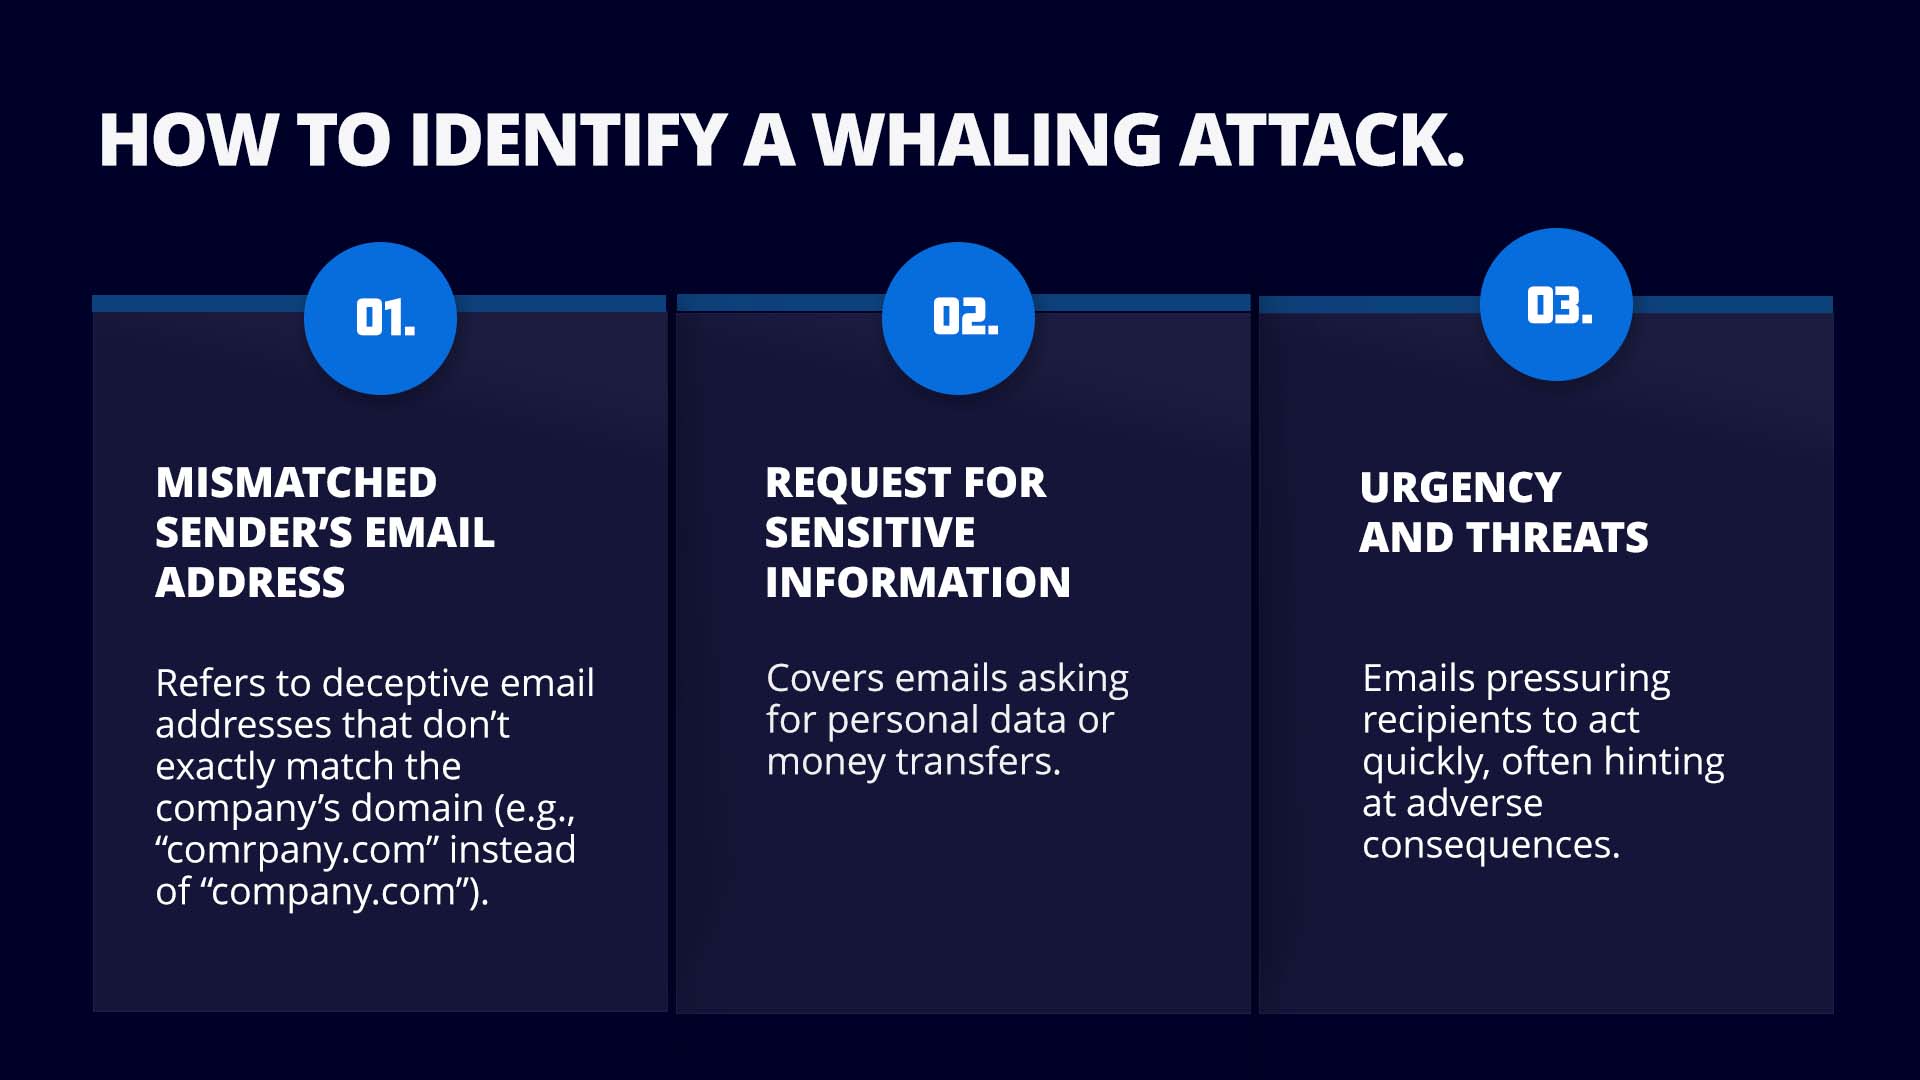 Infographic explaining the most common red flags to identify a whaling attack. Sections include mismatched senders's email address, request for sensitive information, and urgency and threats.